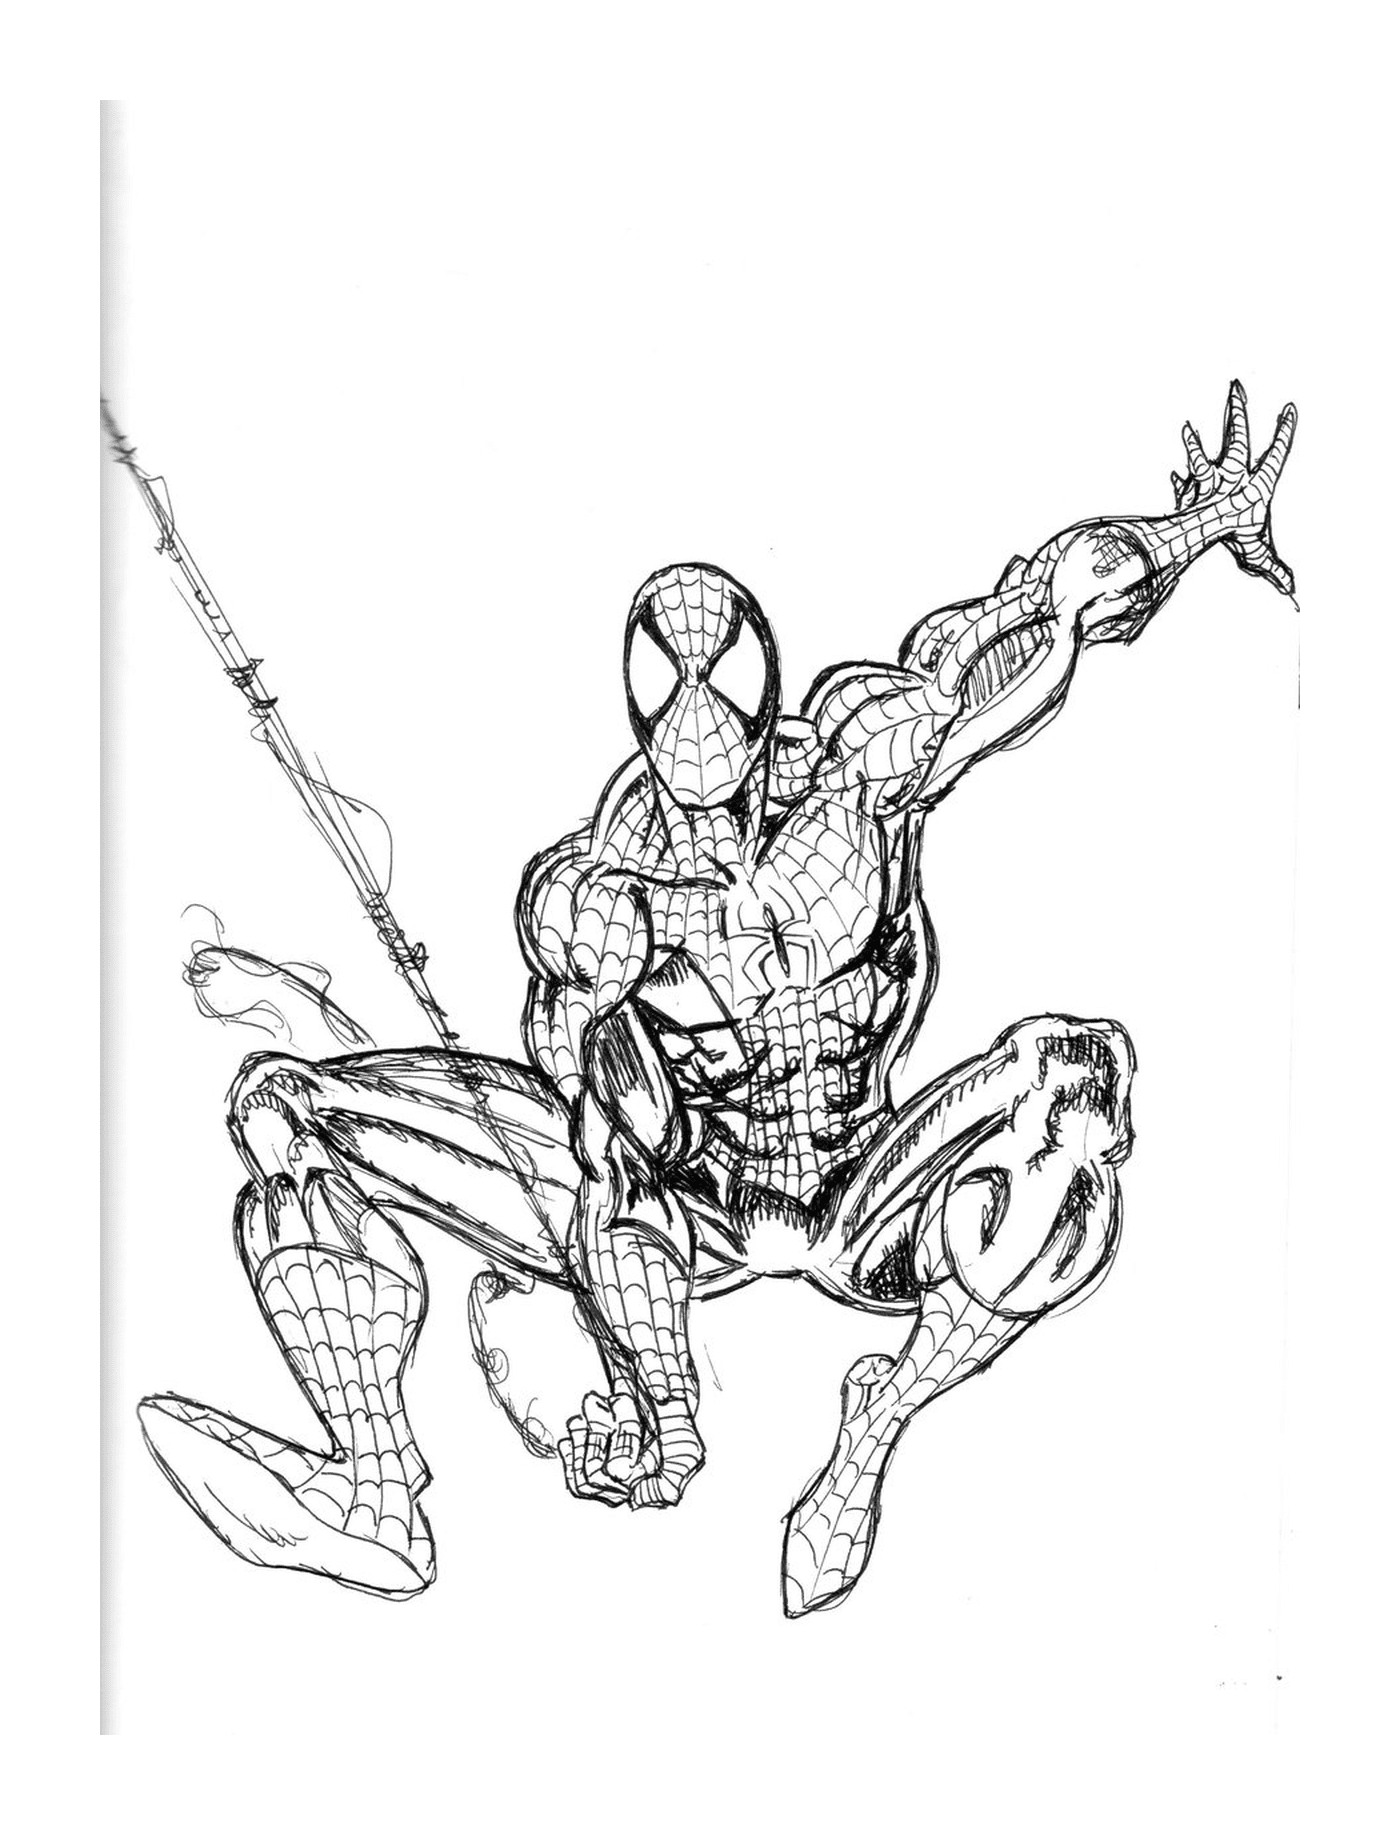  Spiderman with a fishing rod 